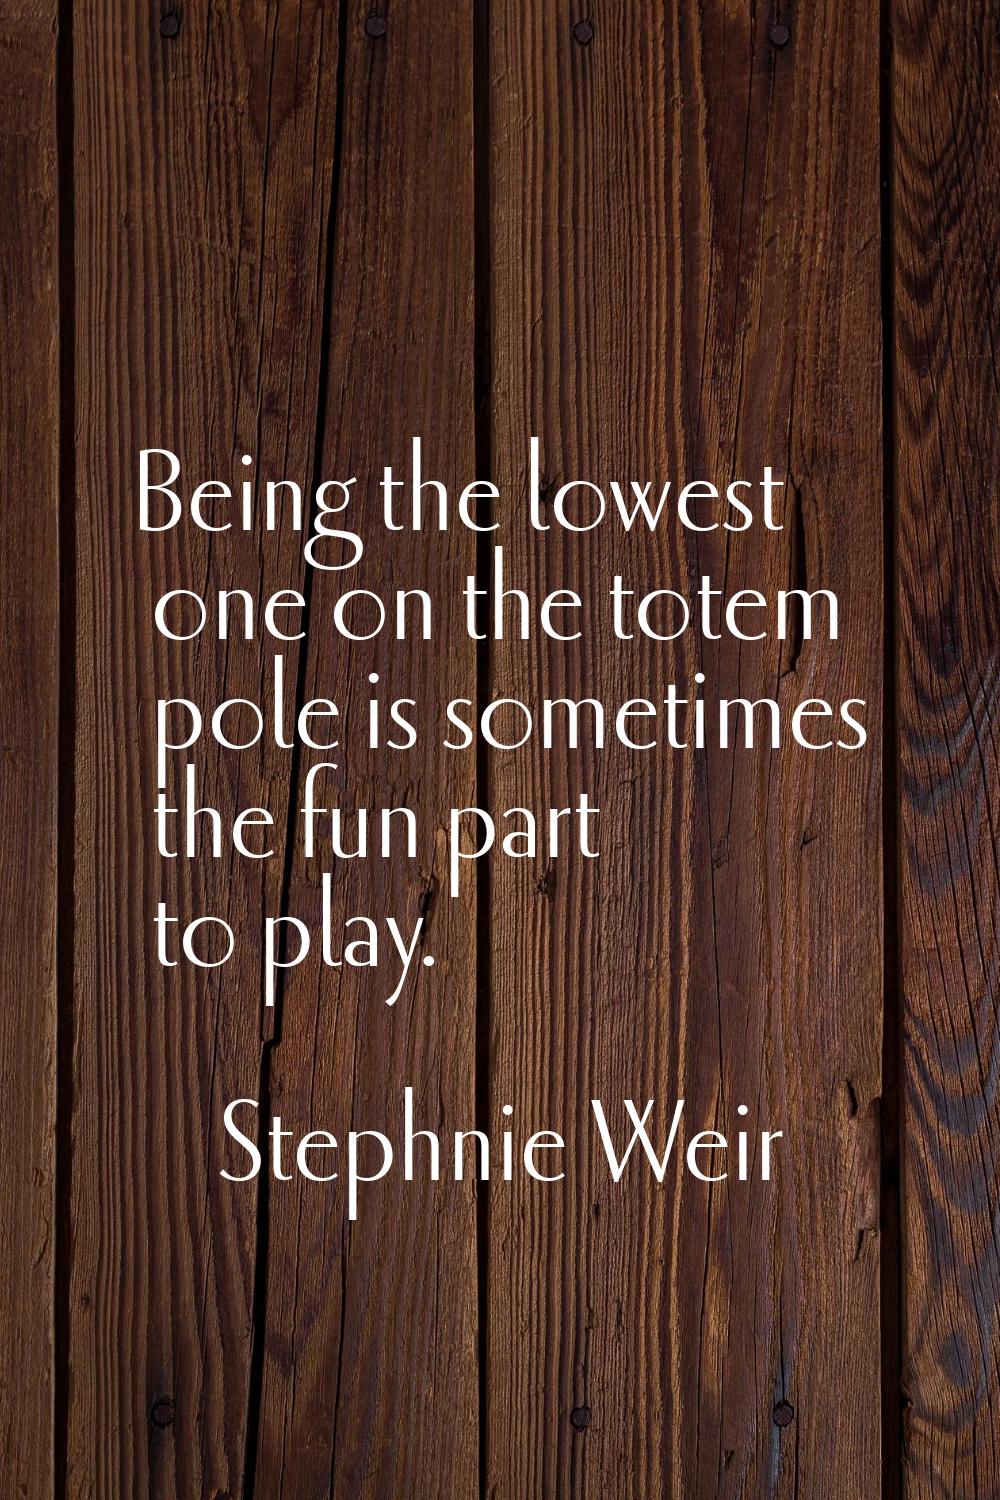 Being the lowest one on the totem pole is sometimes the fun part to play.